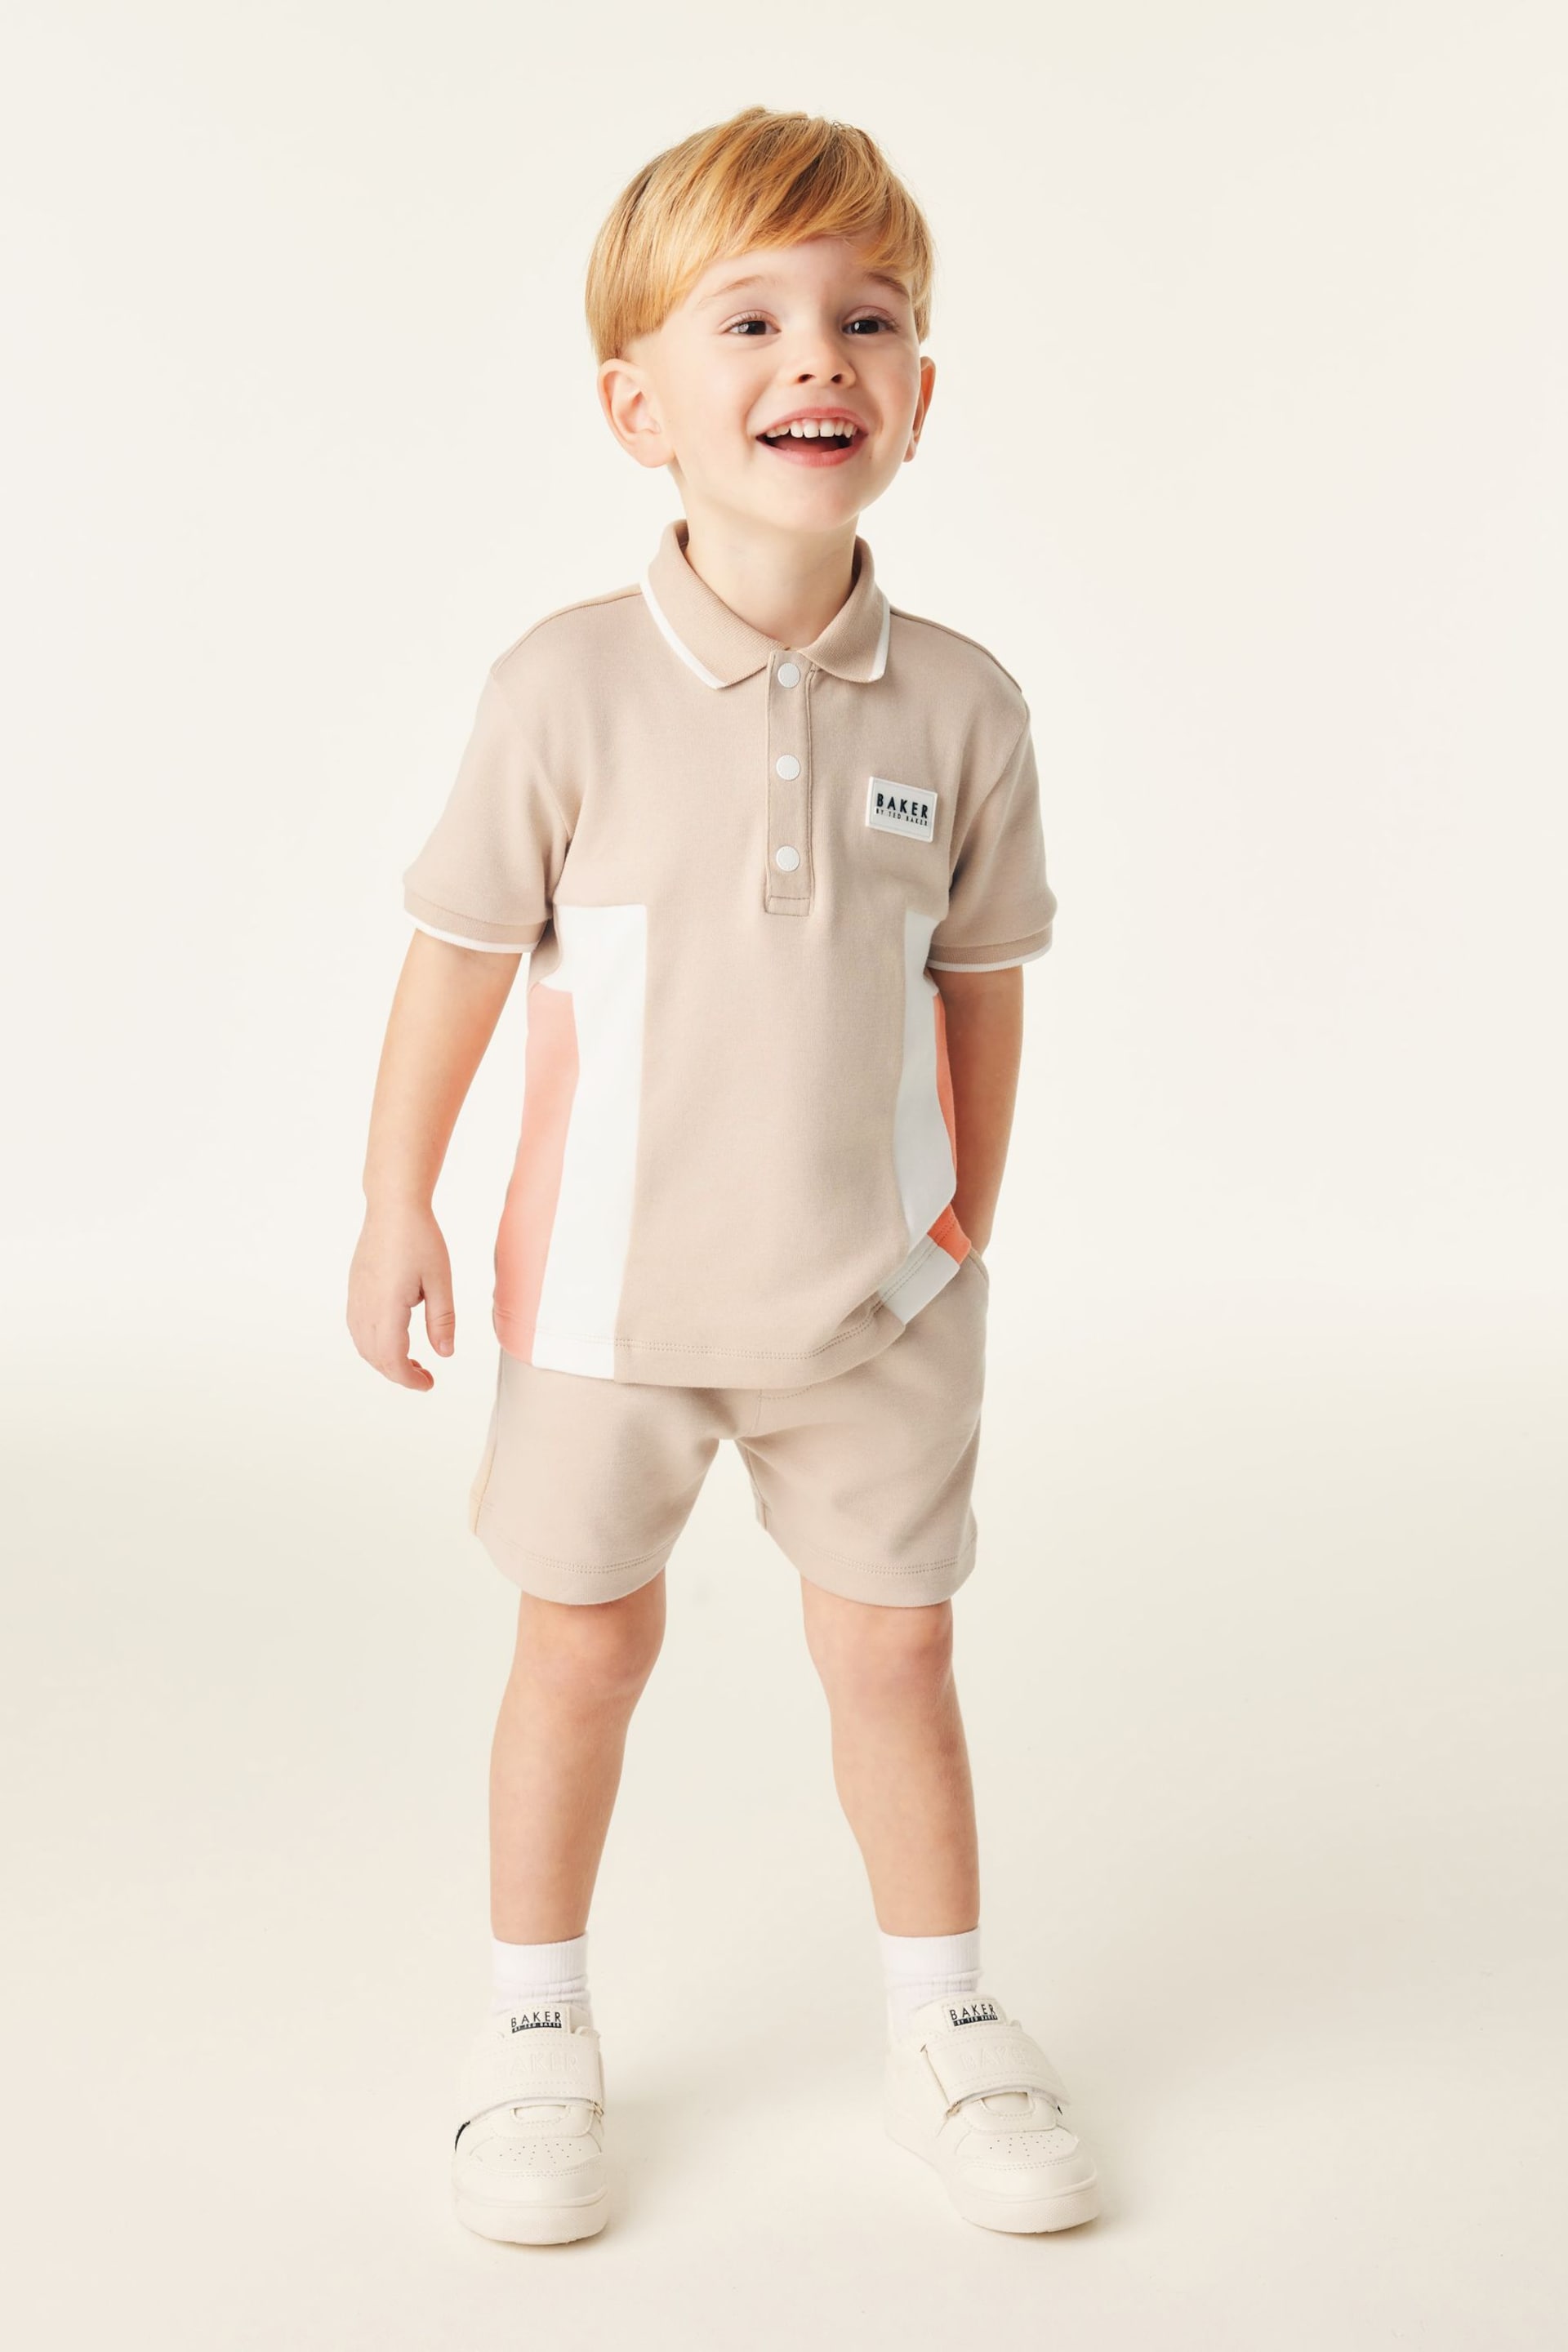 Baker by Ted Baker Colourblock Polo Shirt and Short Set - Image 1 of 11